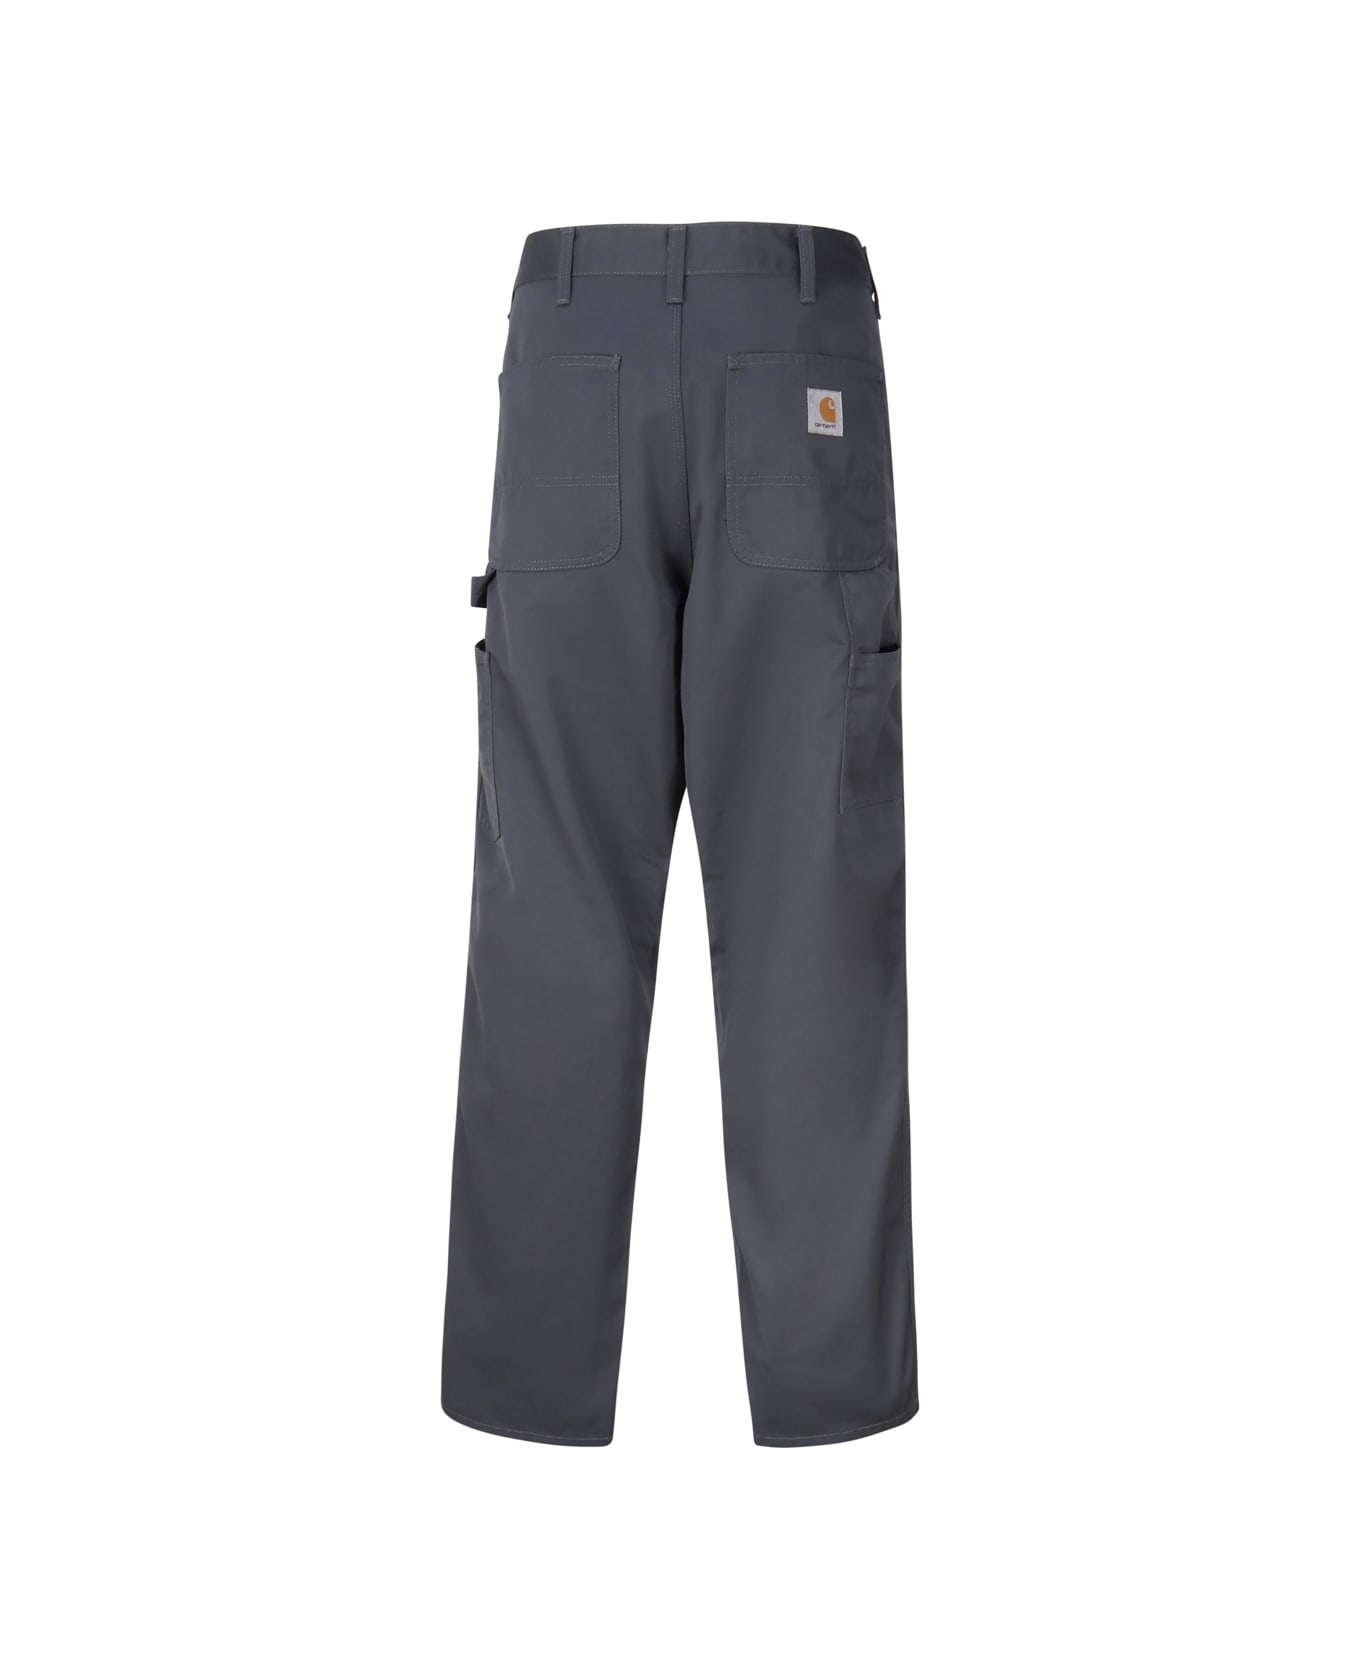 Carhartt Trousers With Knee Detail - Grey